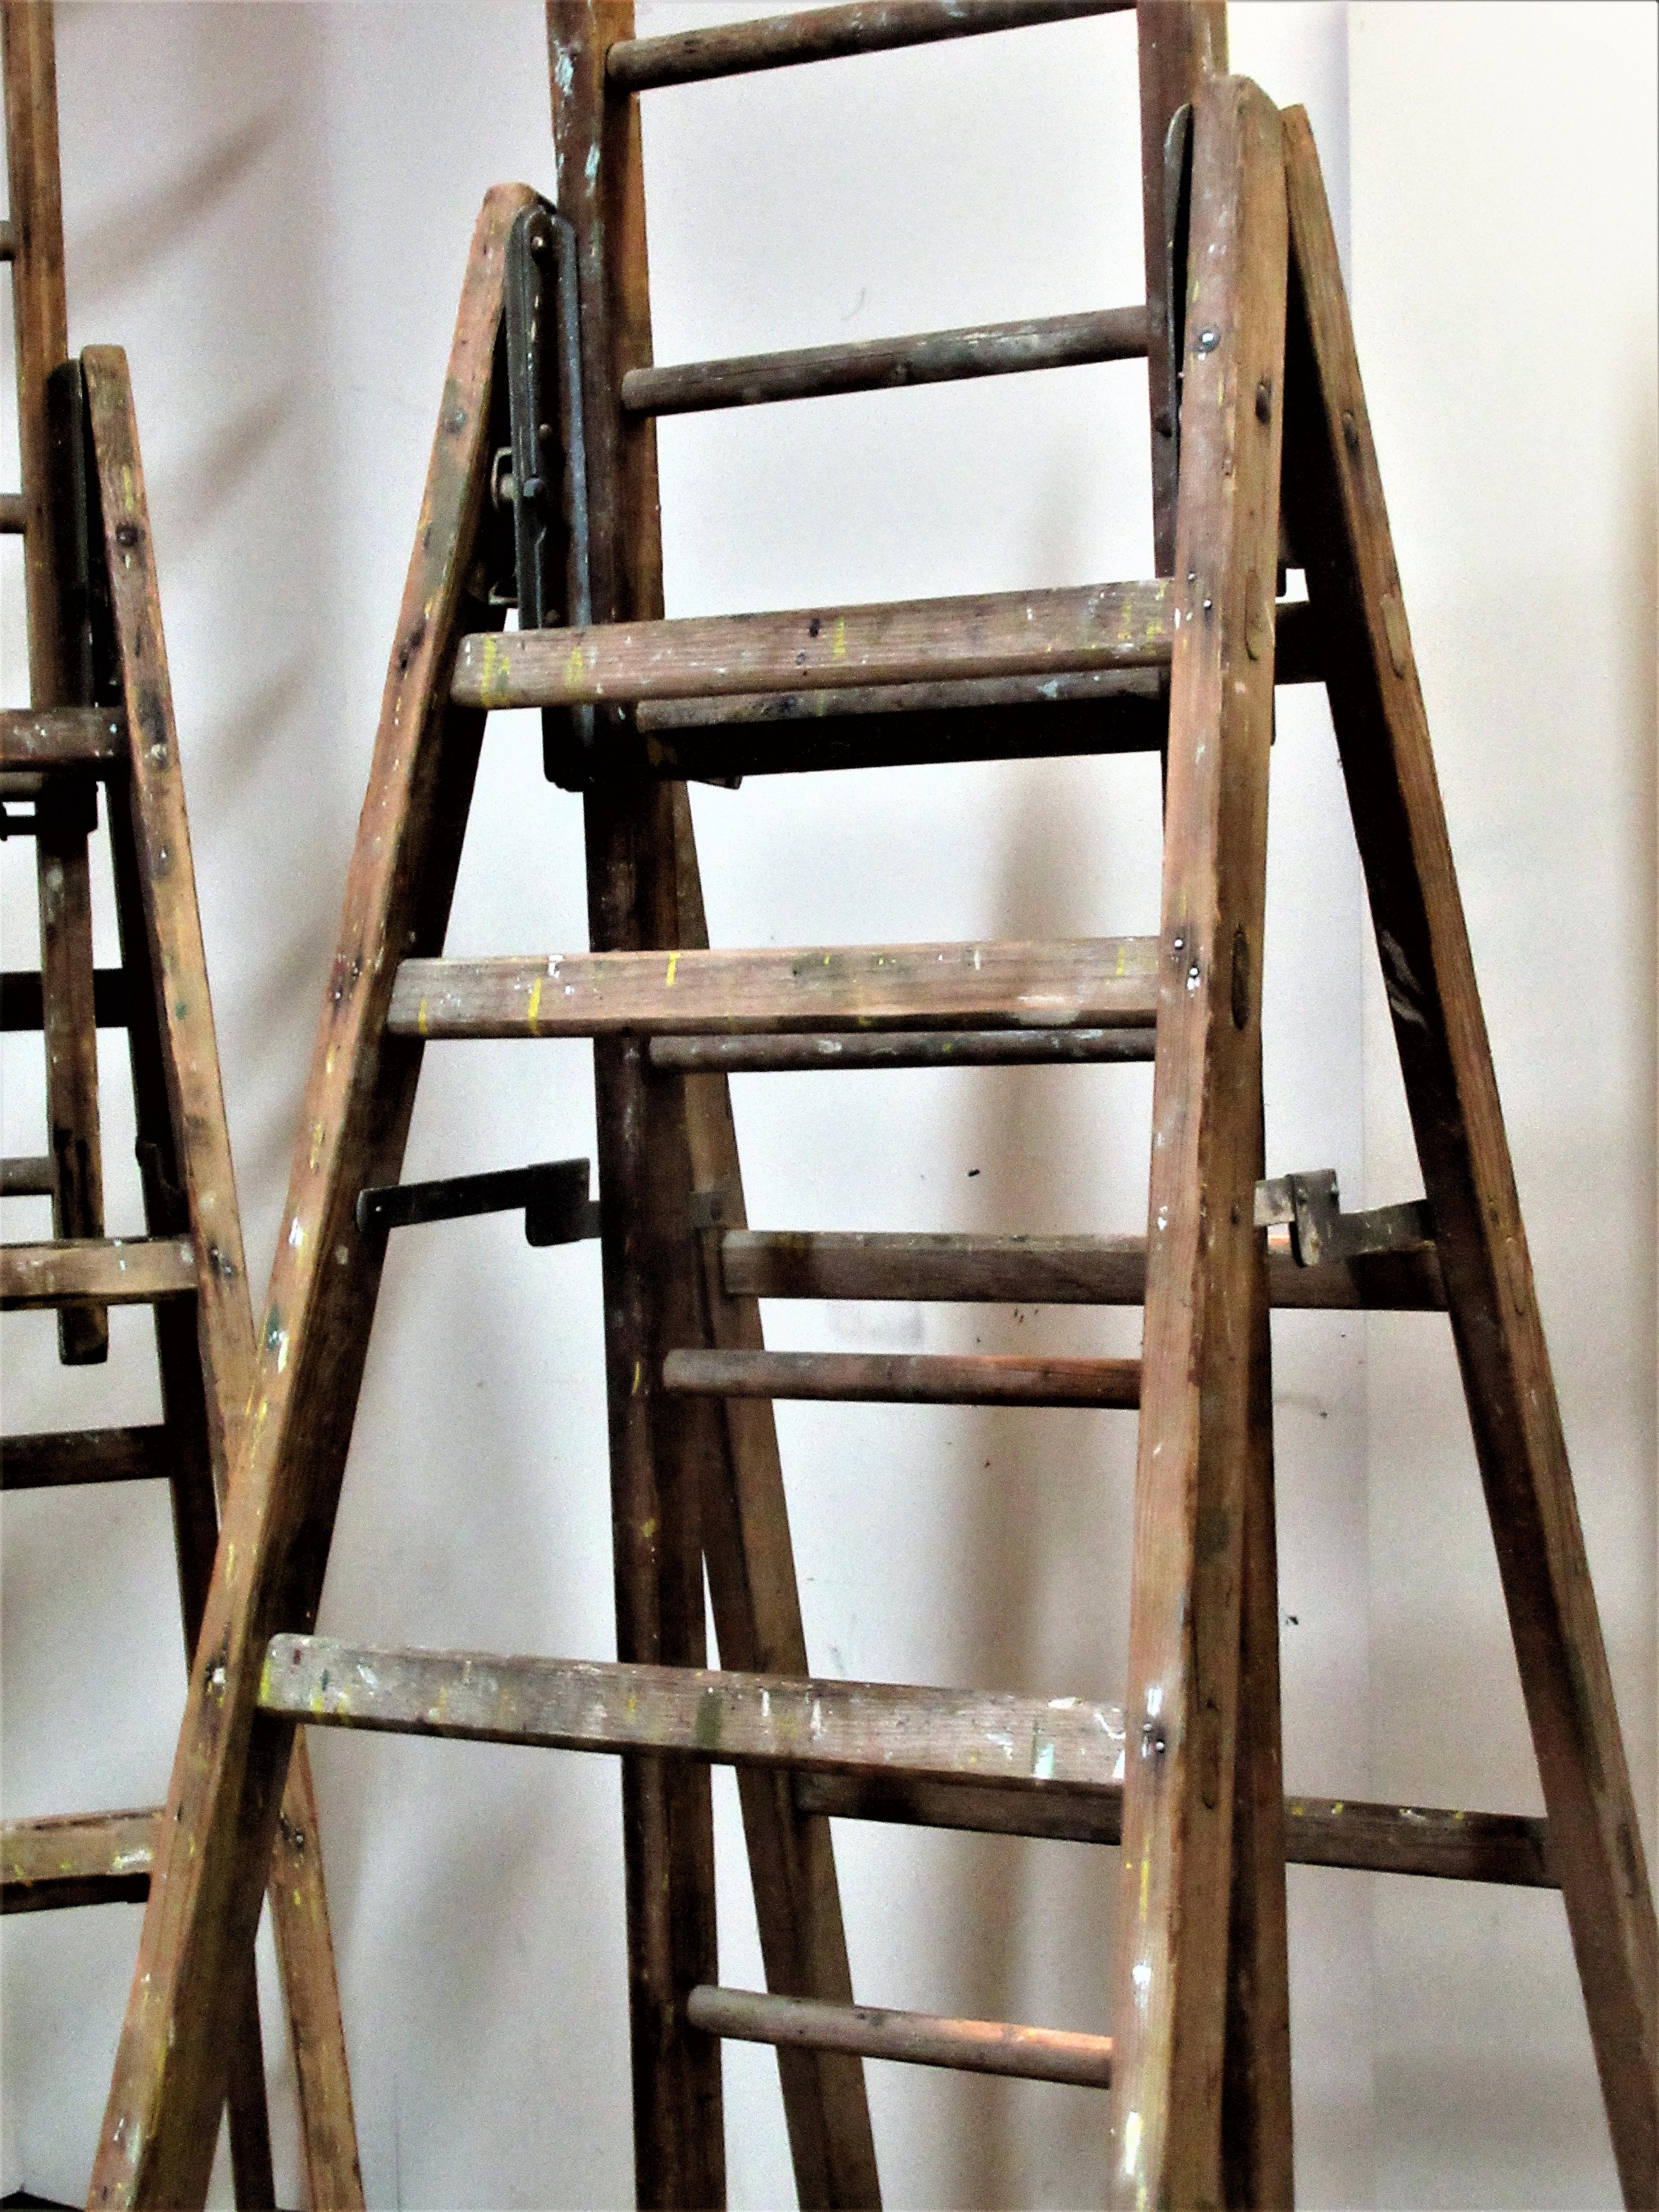 Two old American made wood and steel industrial extension ladders with riveted and mortised construction. Height to top rung when not extended is 66 inches - see picture 9 / height to top rung at fully extended height is 120 inches. There is a steel